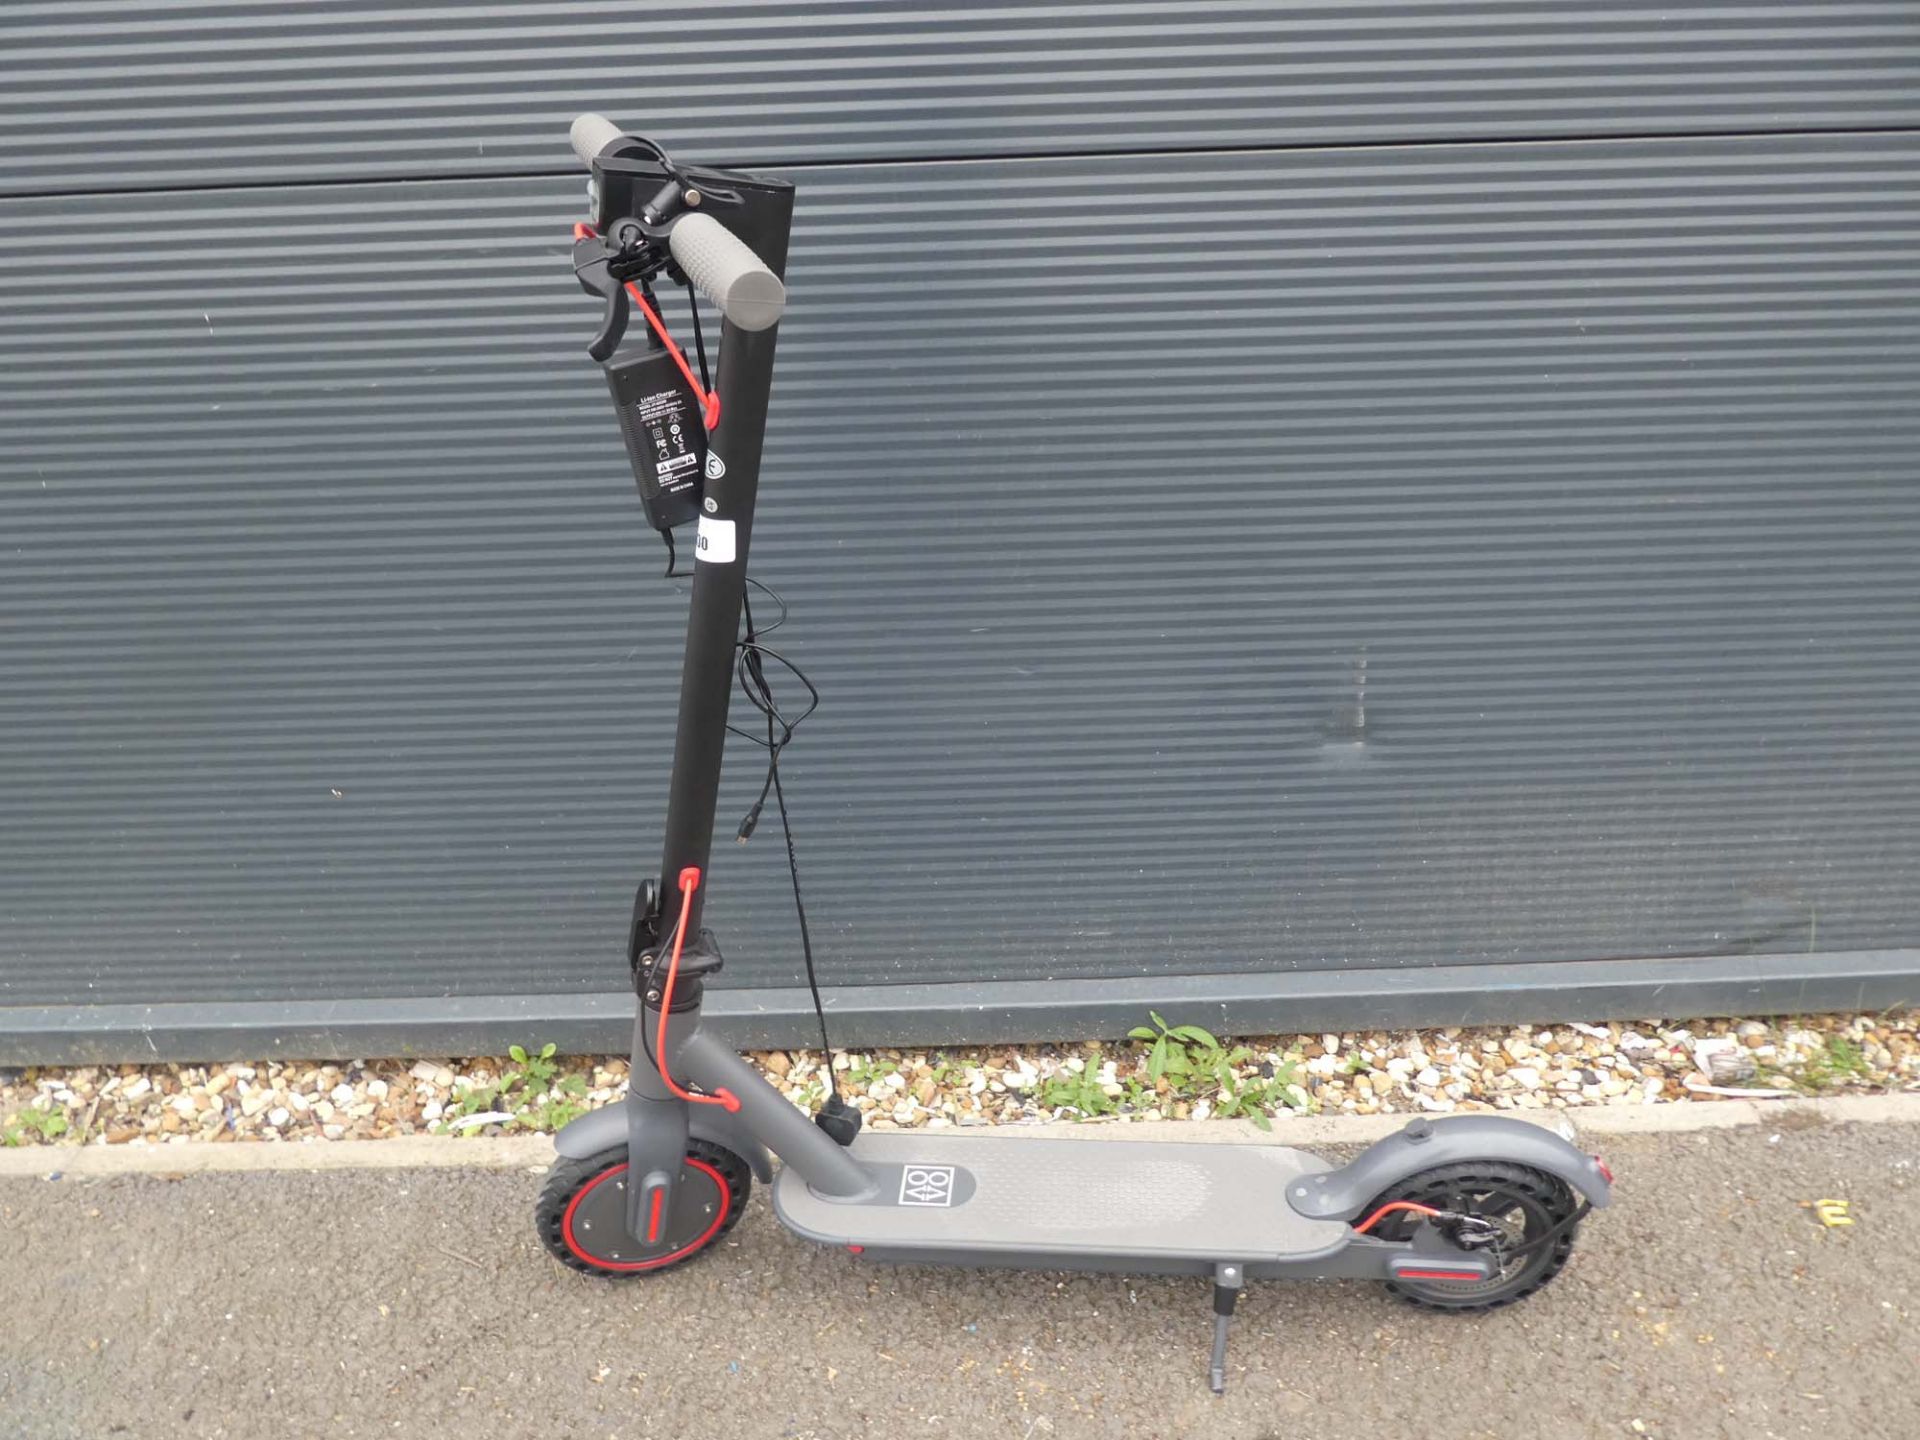 Electric scooter with charger